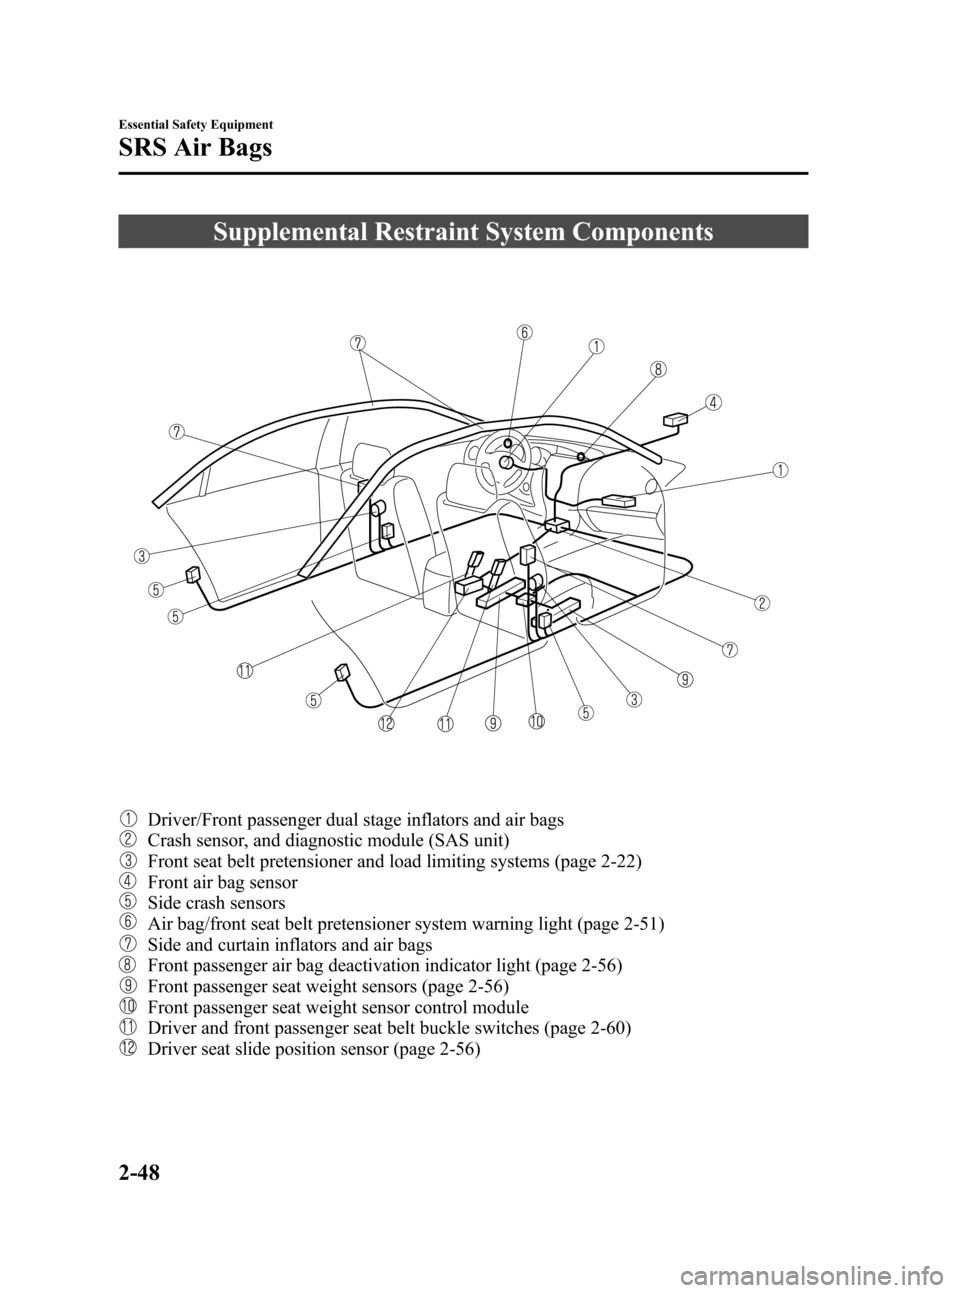 MAZDA MODEL 3 HATCHBACK 2010  Owners Manual (in English) Black plate (62,1)
Supplemental Restraint System Components
Driver/Front passenger dual stage inflators and air bags
Crash sensor, and diagnostic module (SAS unit)
Front seat belt pretensioner and loa